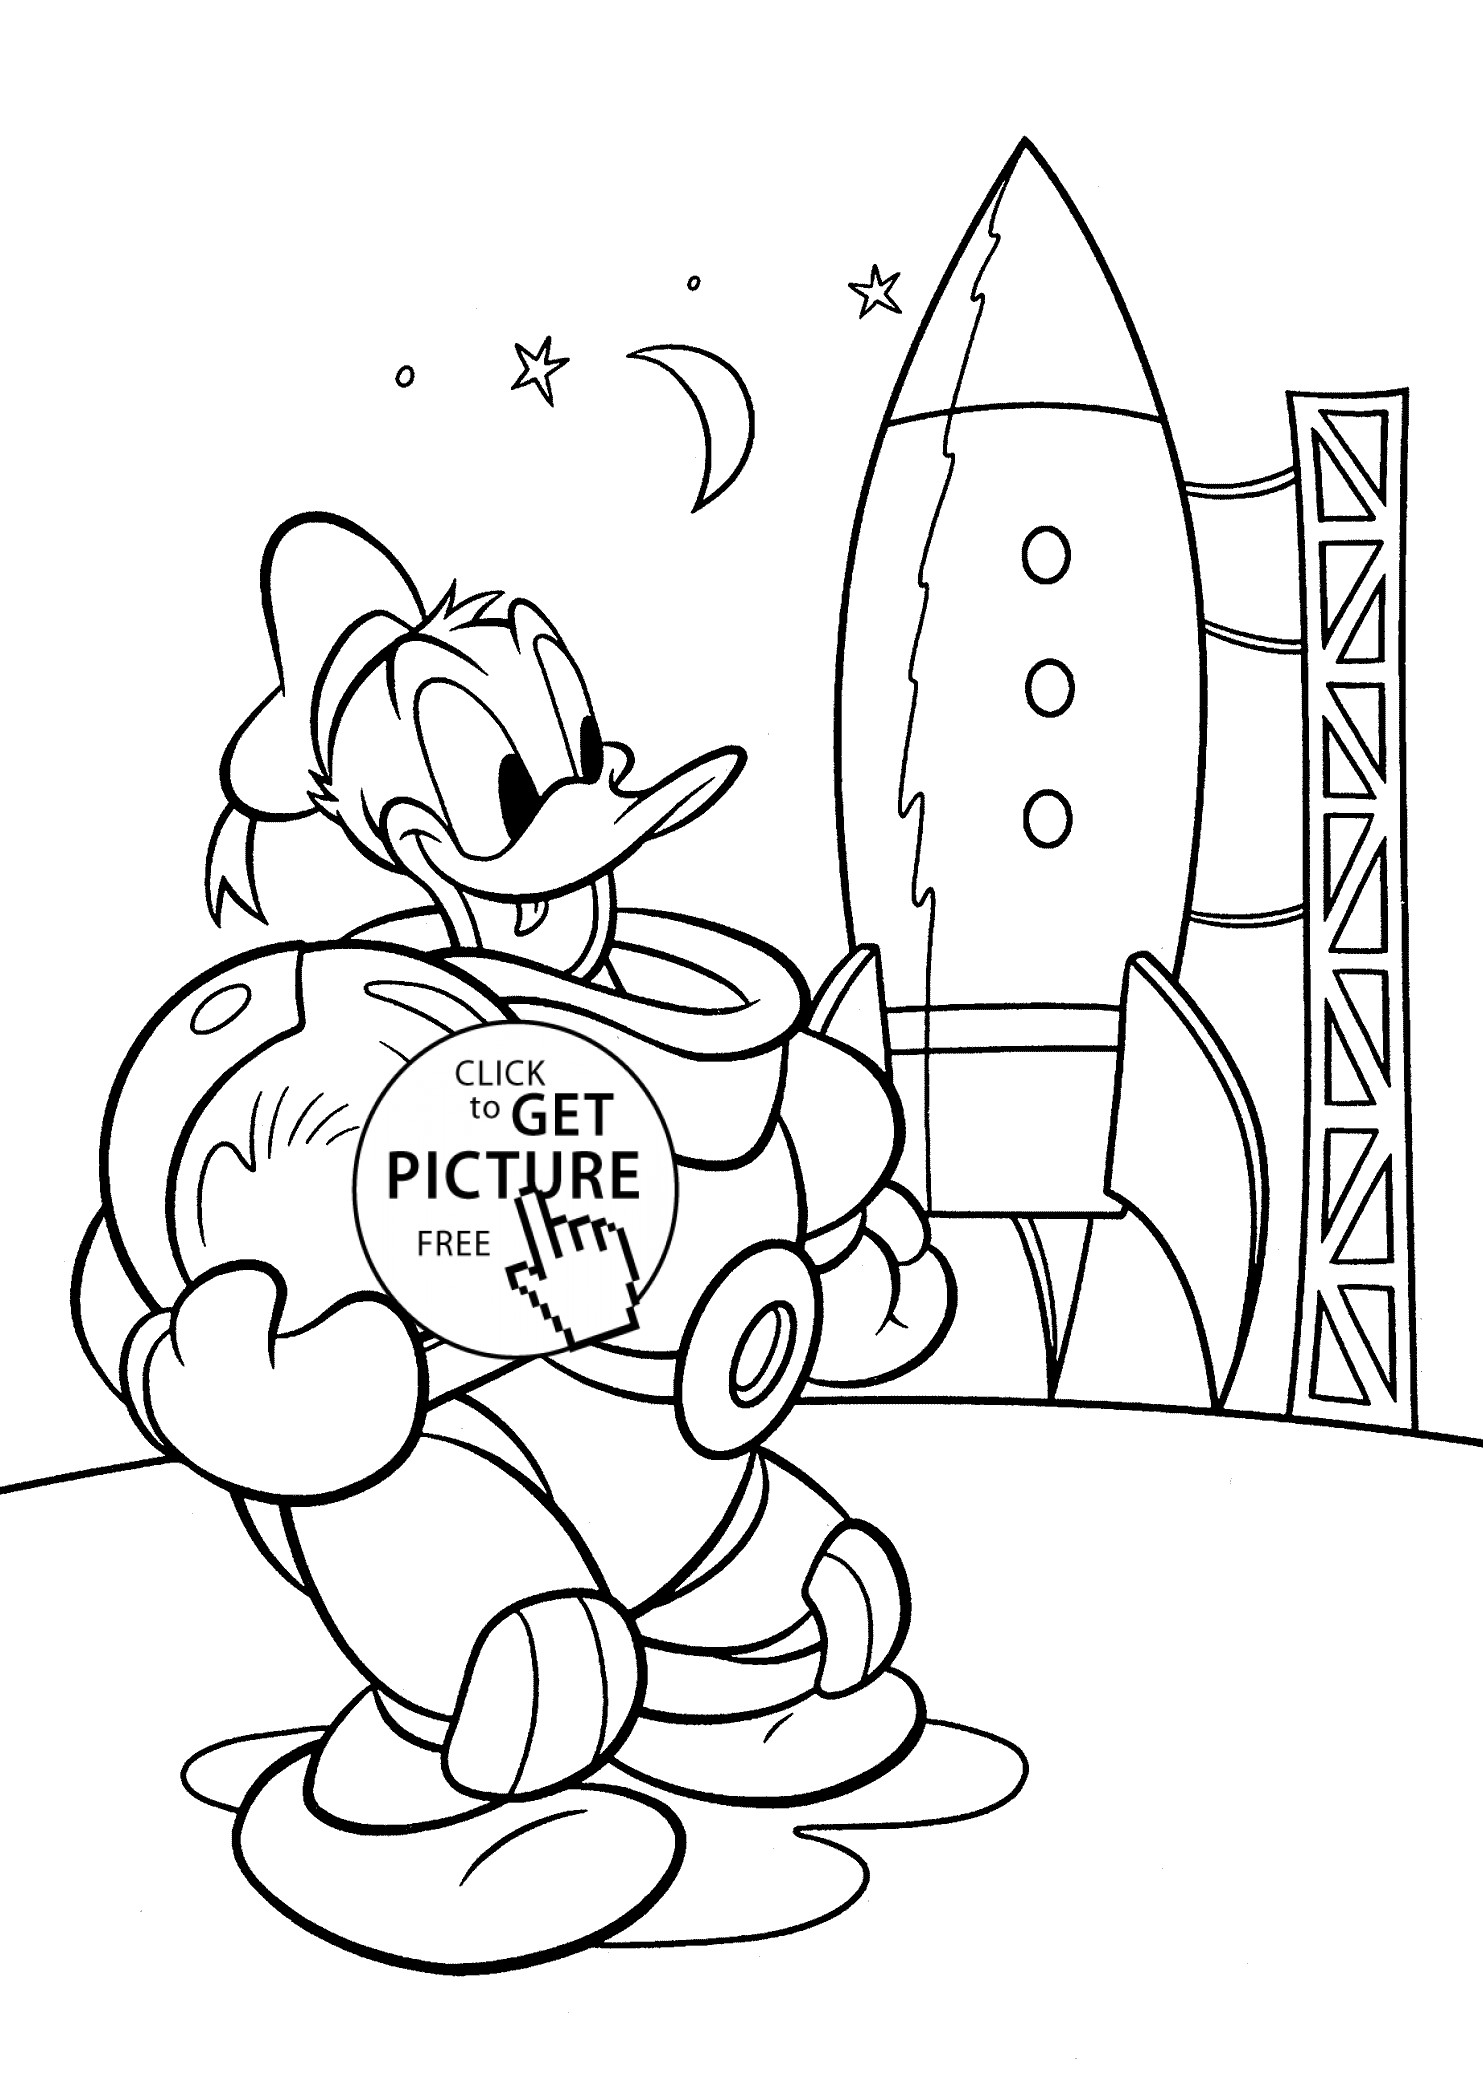 Coloring Pages For Kids Free
 Donald Duck astronaut coloring pages for kids printable